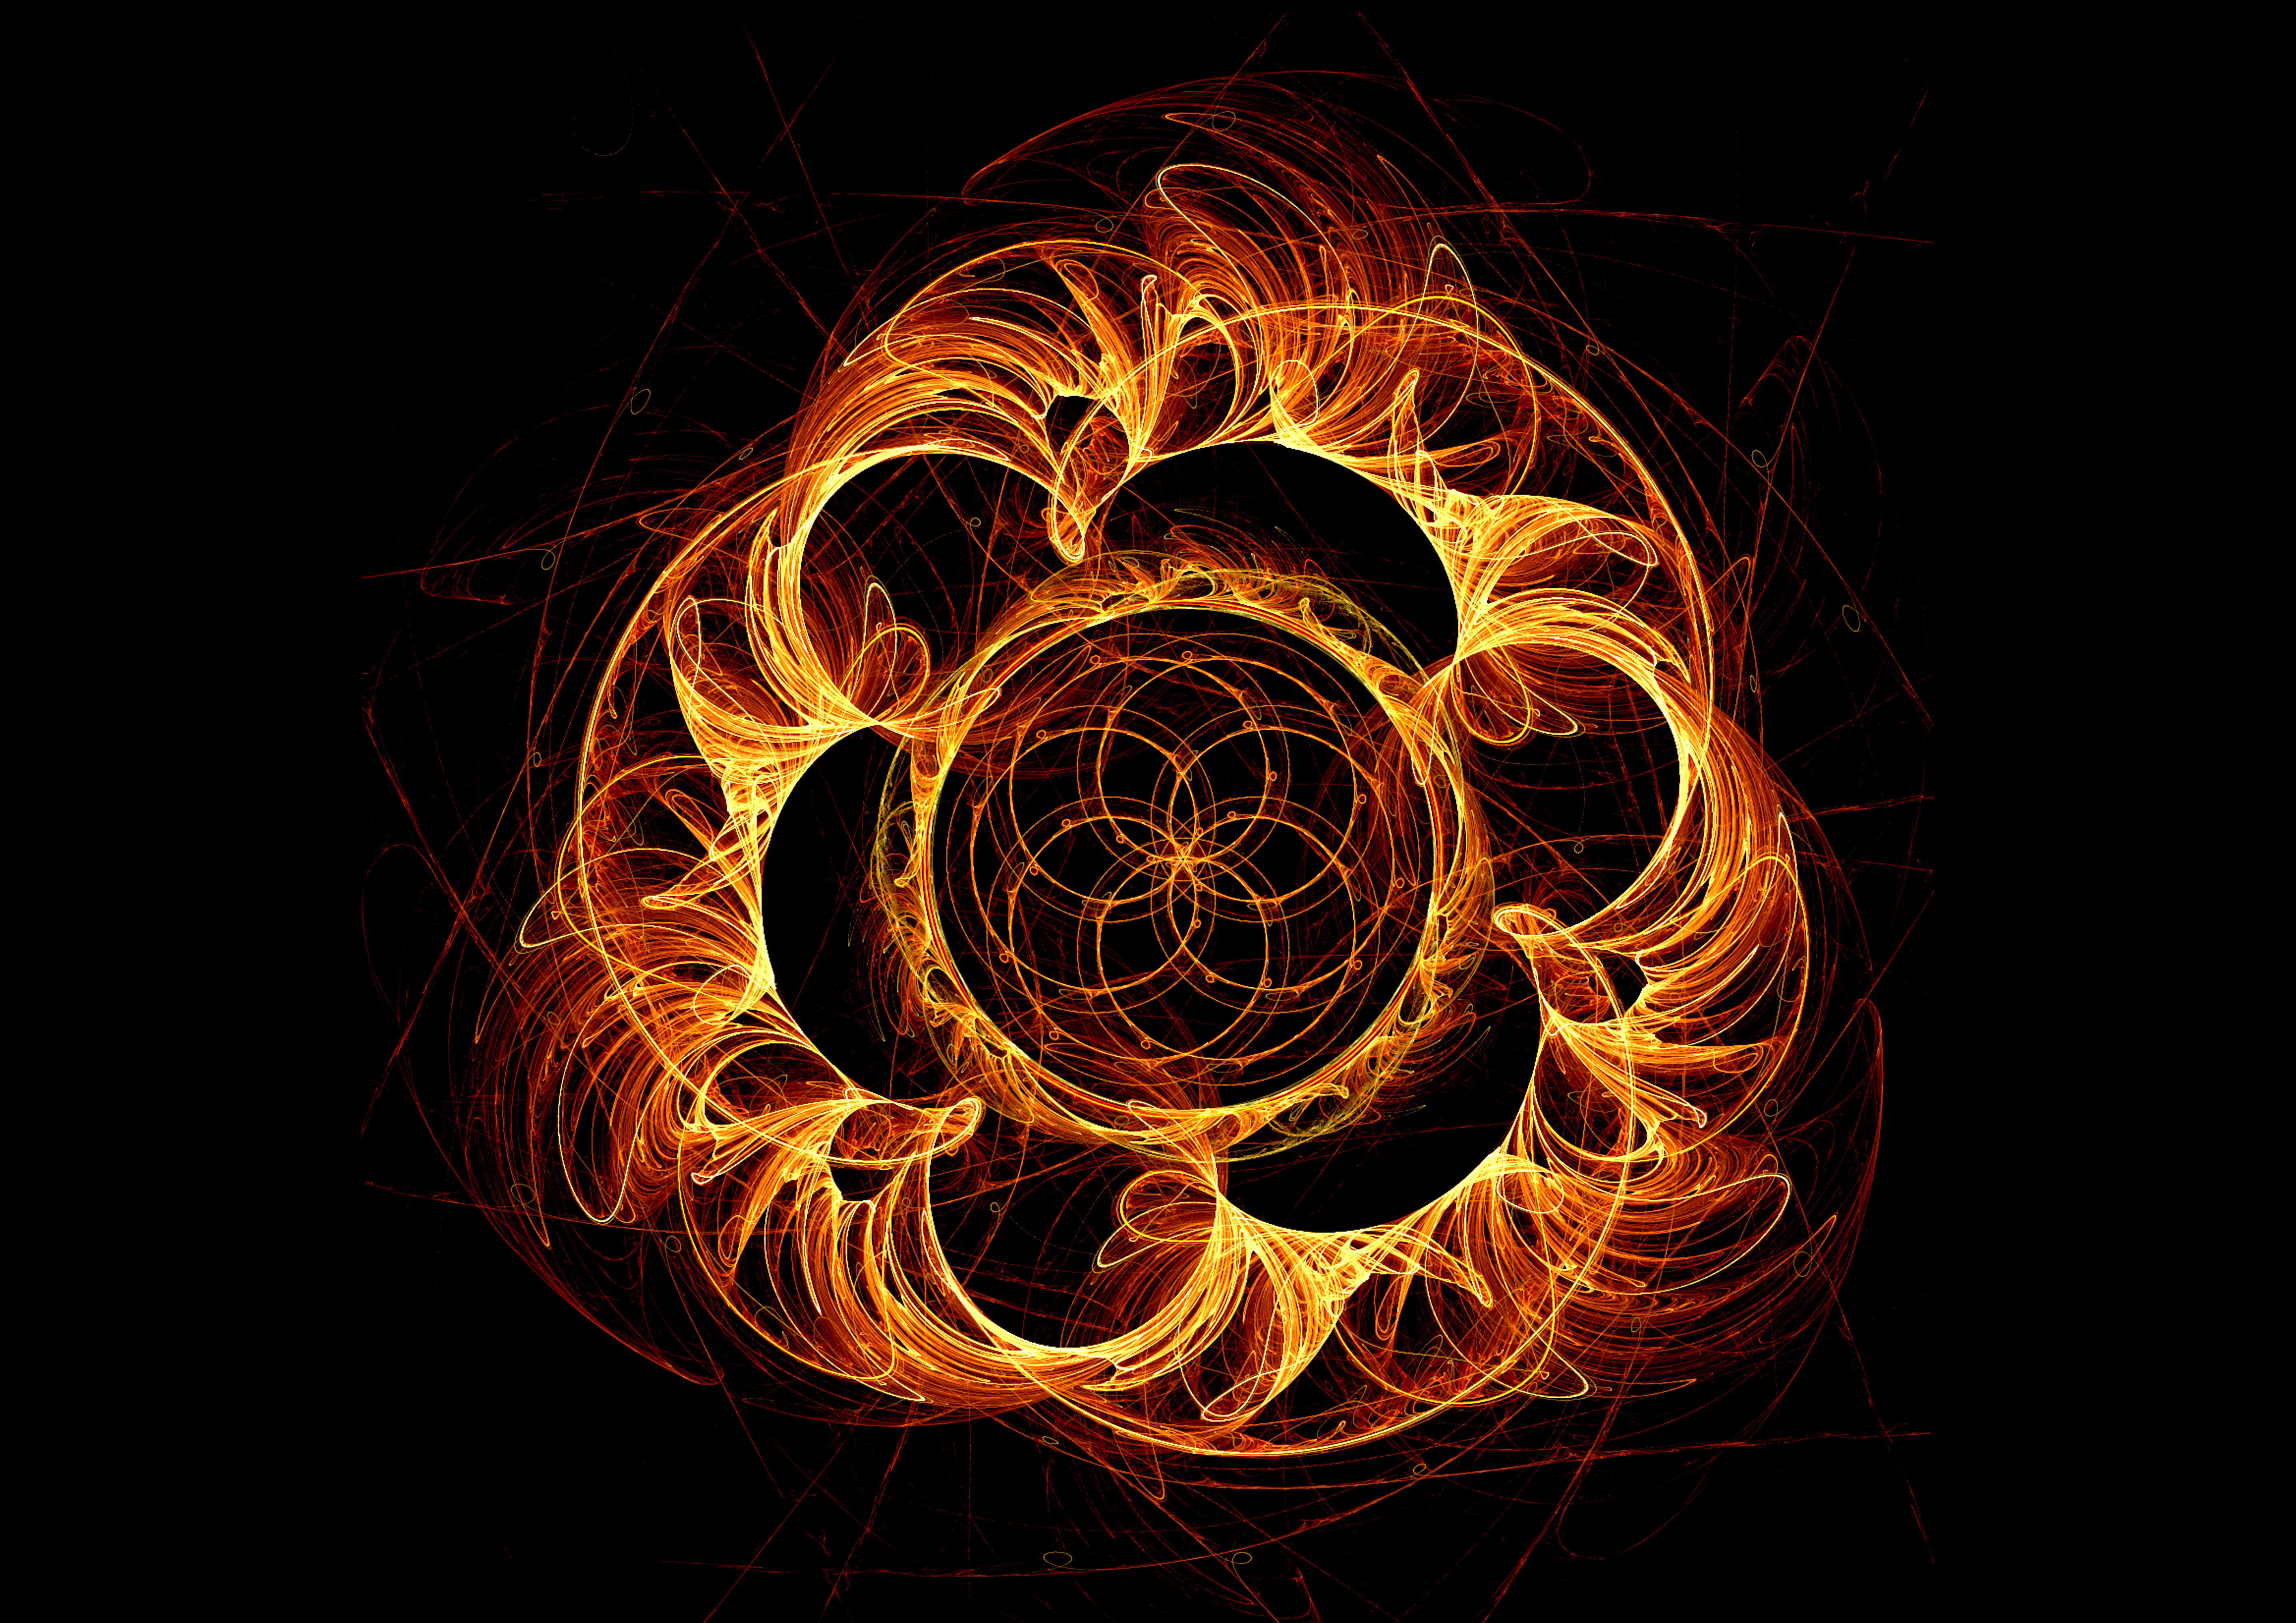 Cool Wallpapers abstract, bright, fractal, confused, intricate, flaming, swirling, involute, fiery